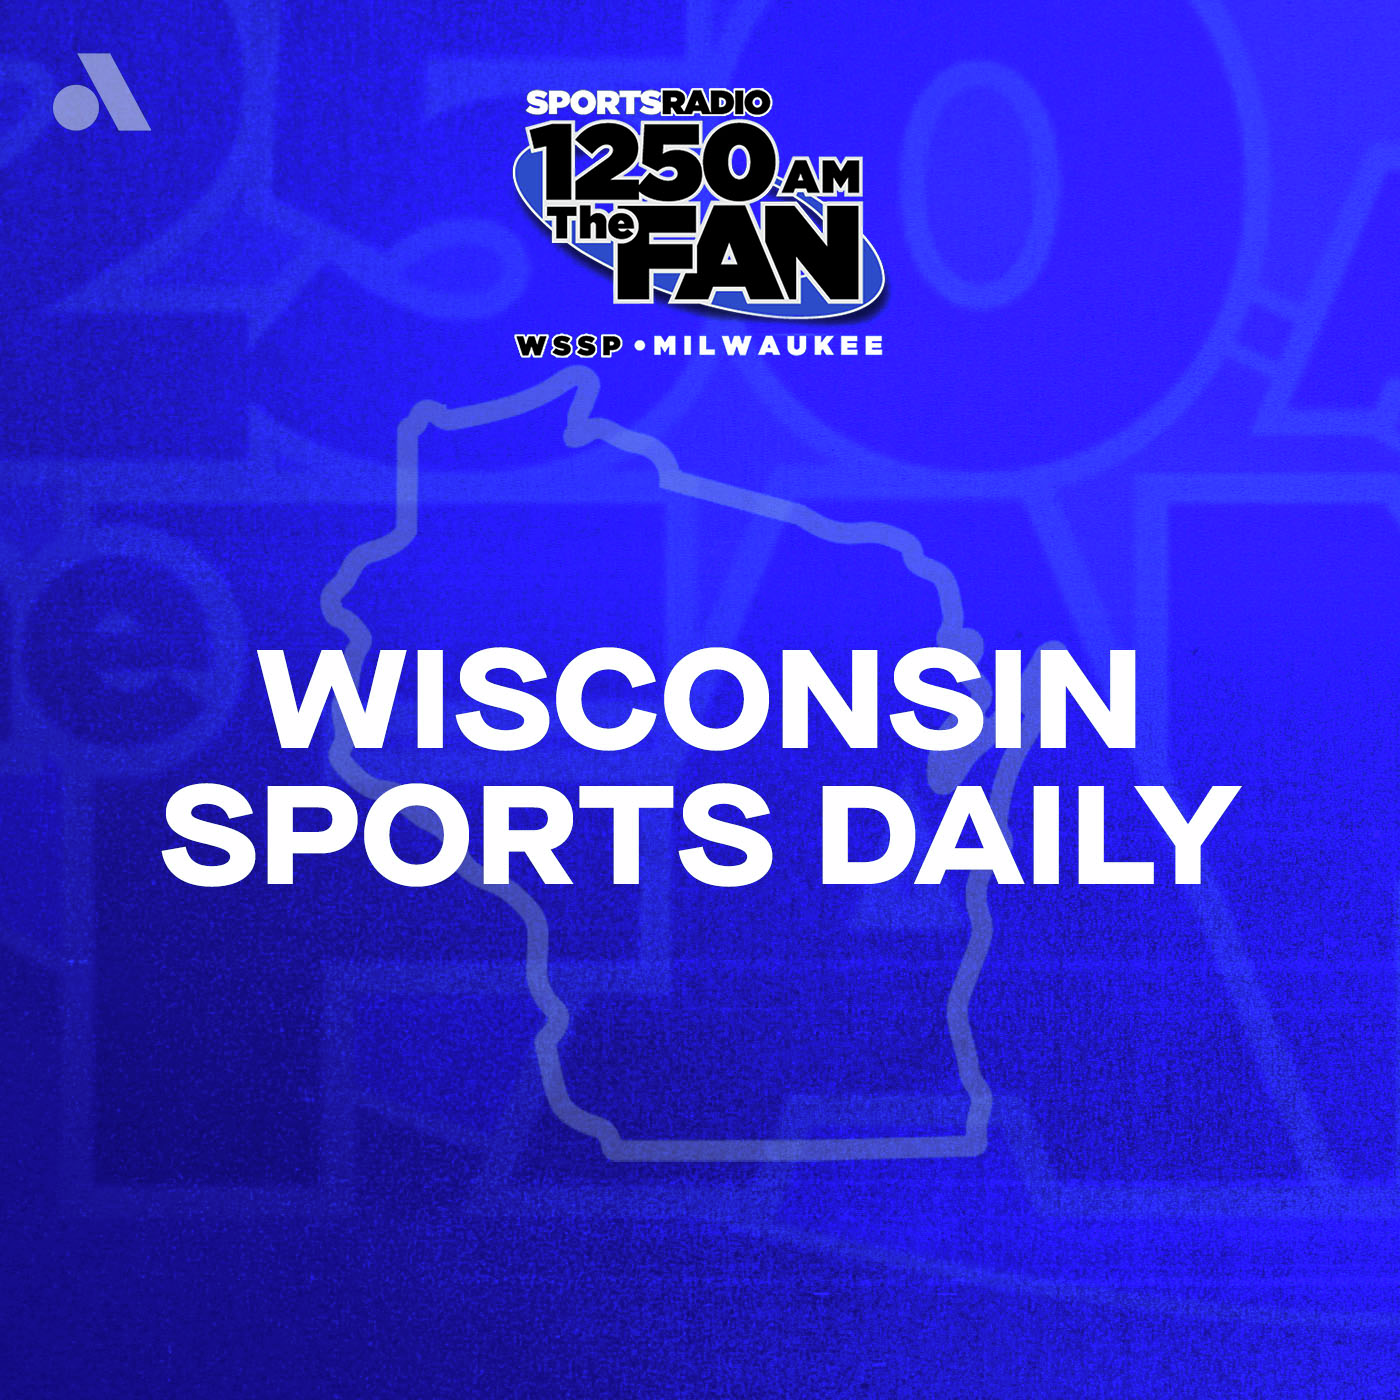 Wednesday, June 5th: Gery Woelfel Joins Wisconsin Sports Daily!